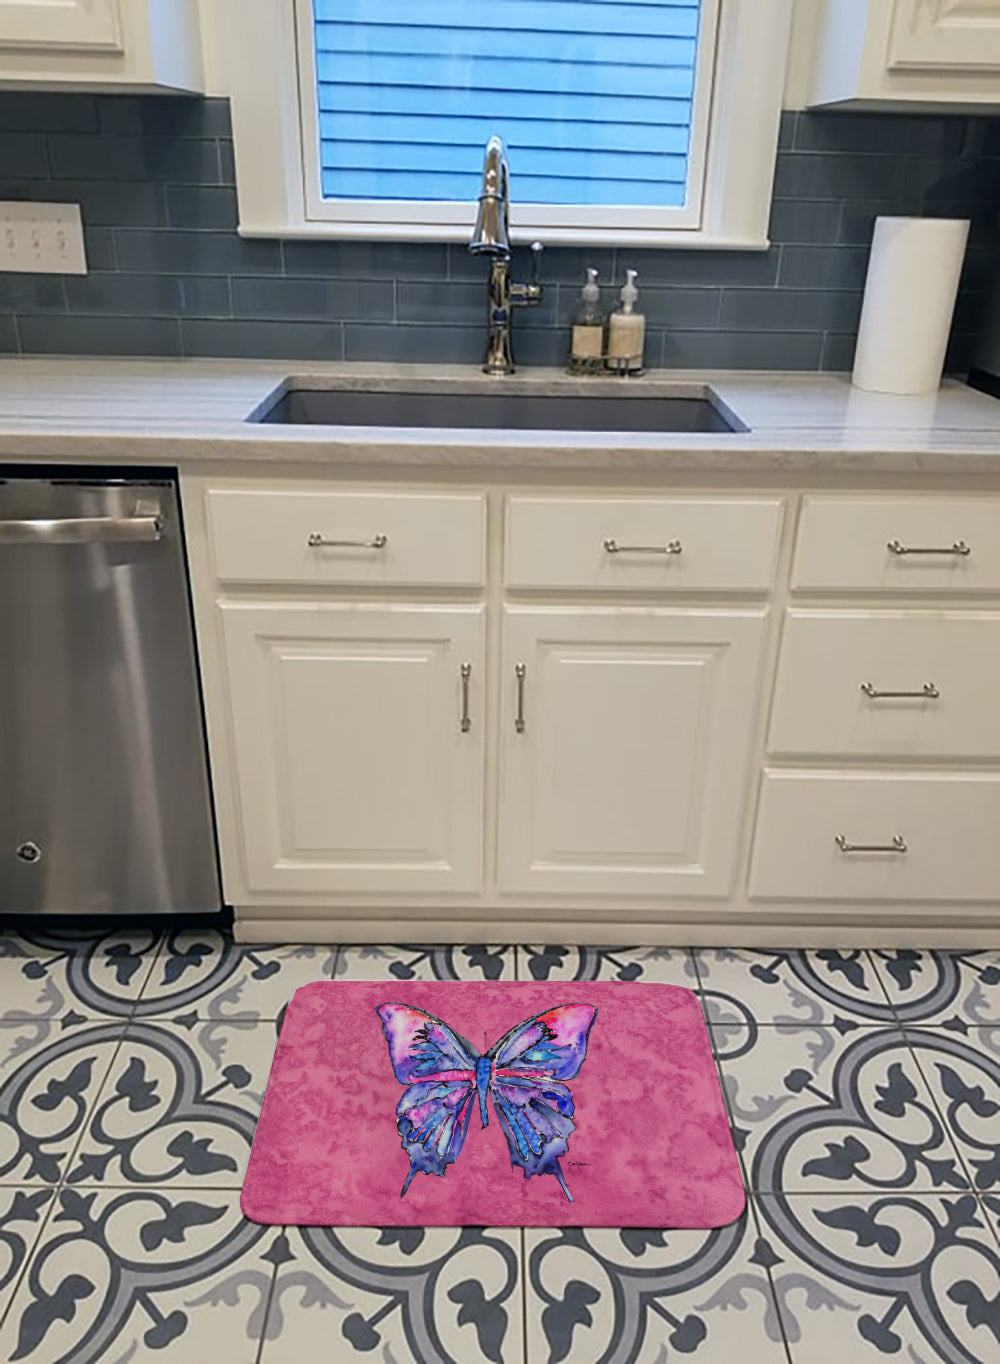 Butterfly on Pink Machine Washable Memory Foam Mat 8859RUG - the-store.com